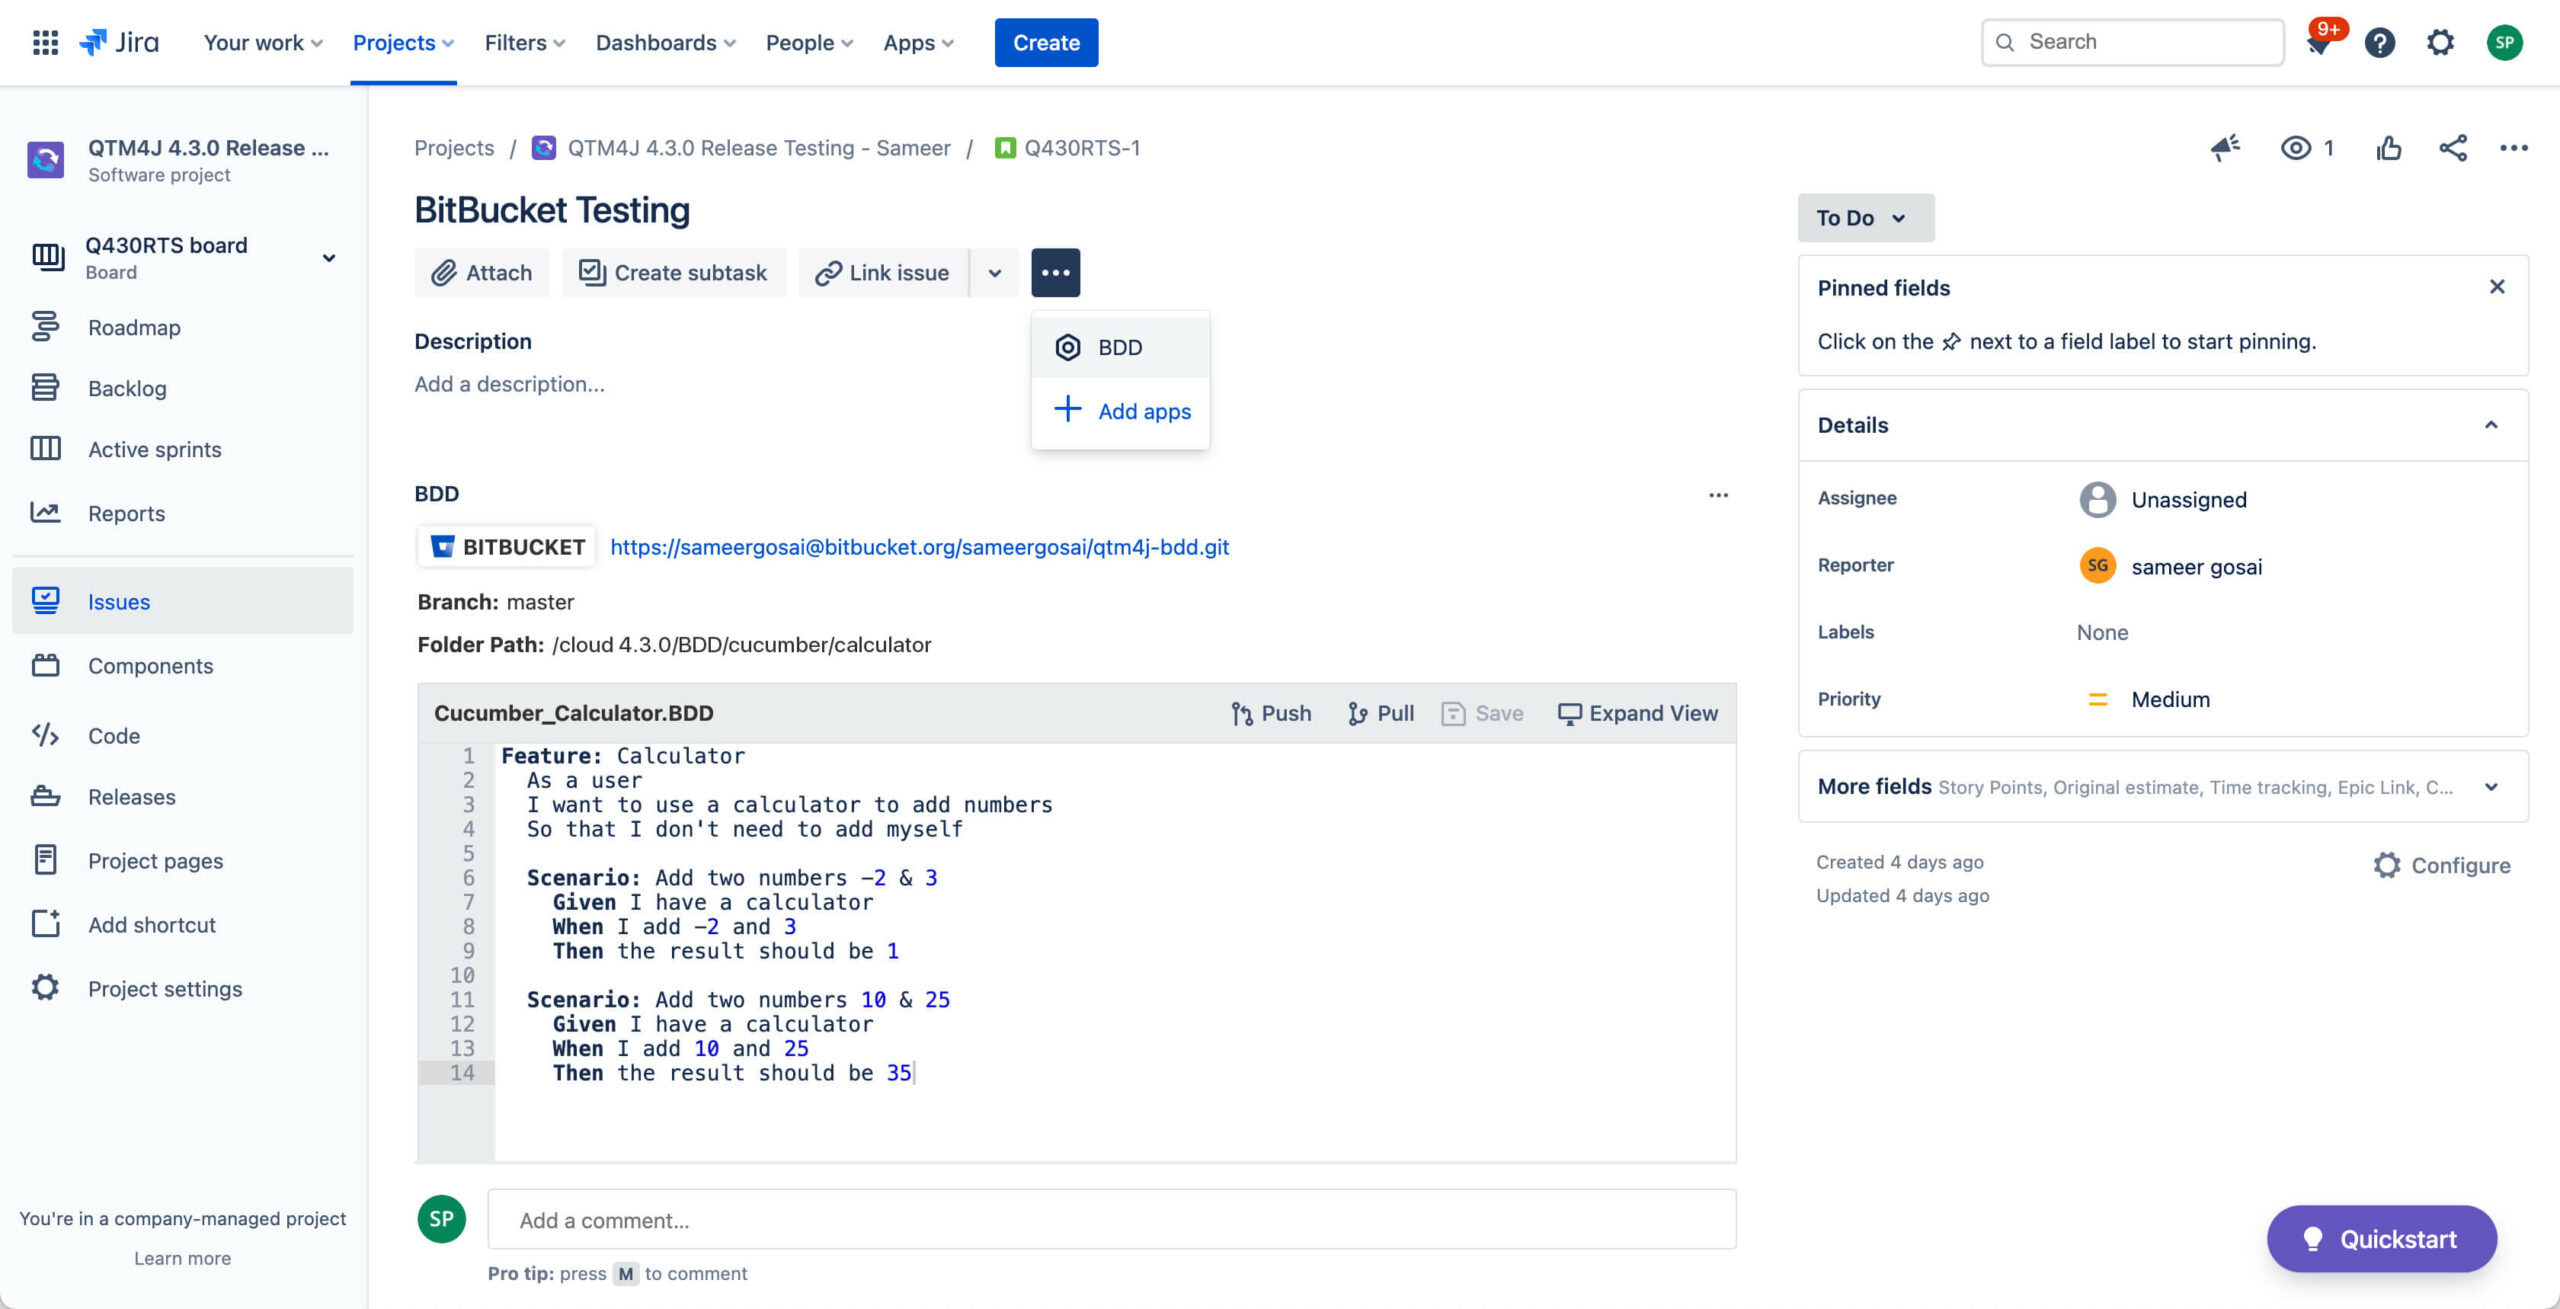 Image BDD in QMetry Test Management for Jira